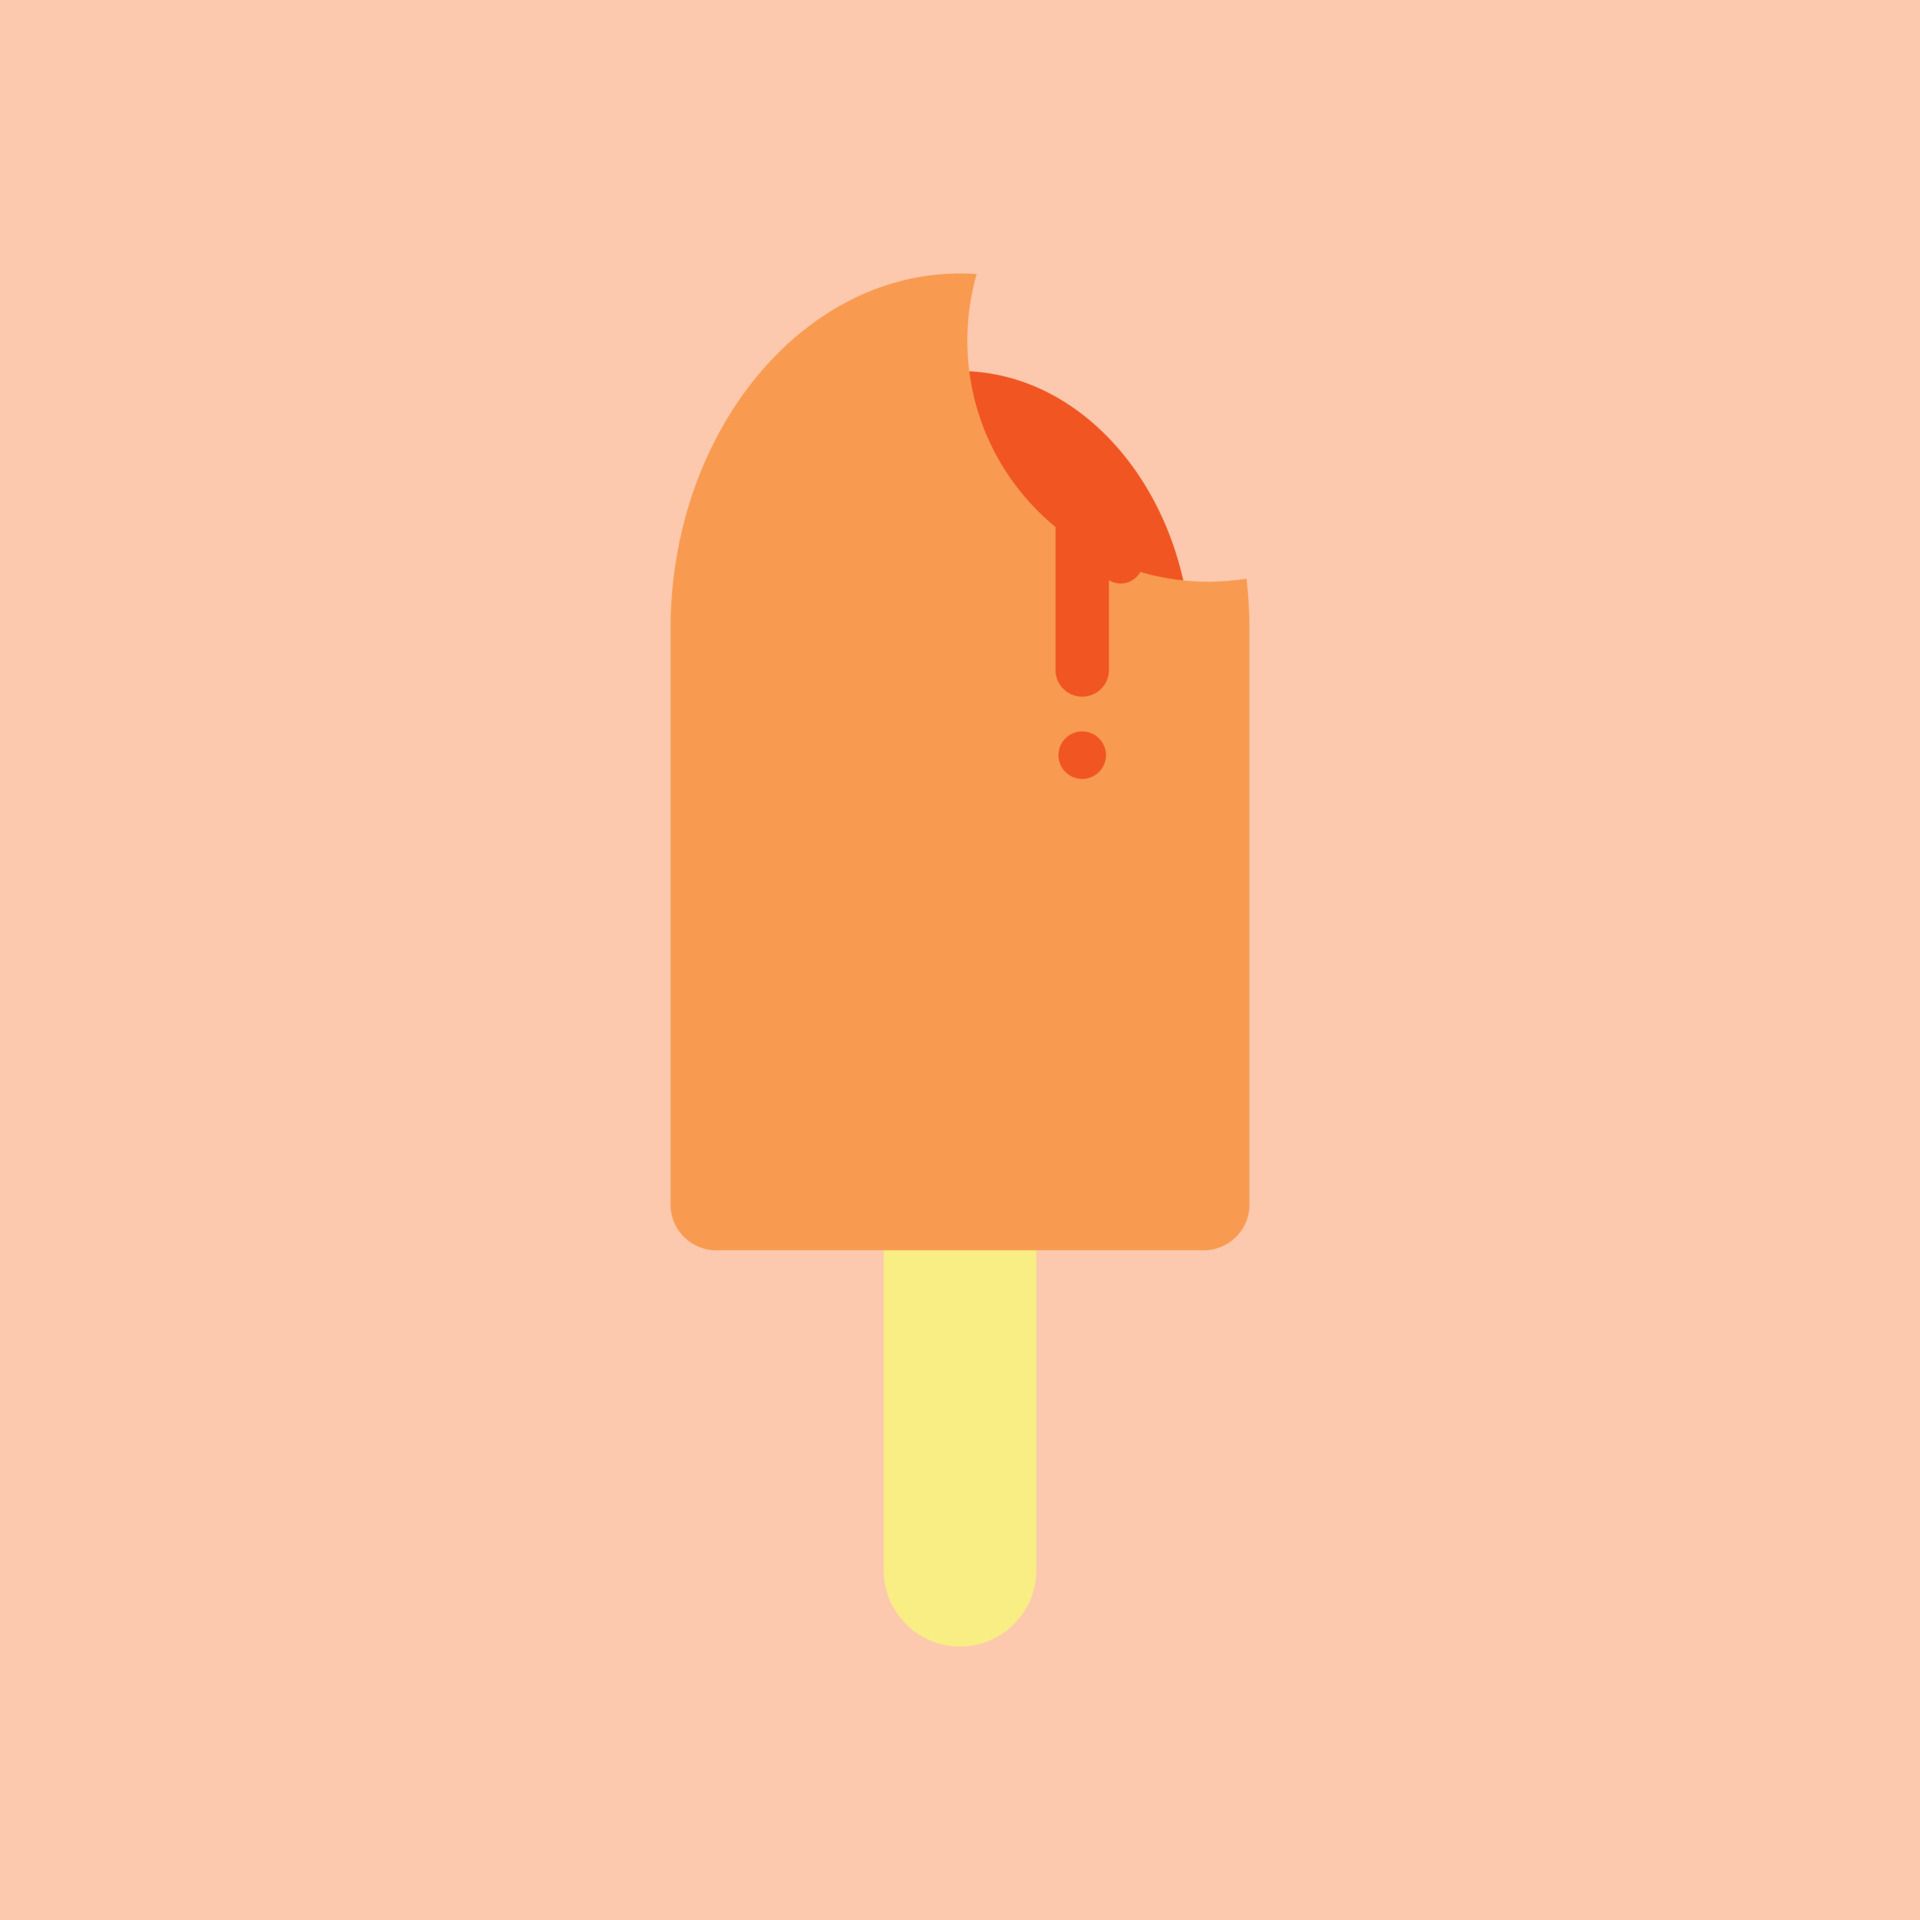 popsicle ice cream icon. Flat design vector illustration. Design for wallpaper, wrapping, fabric, background, apparel, prints, banners etc